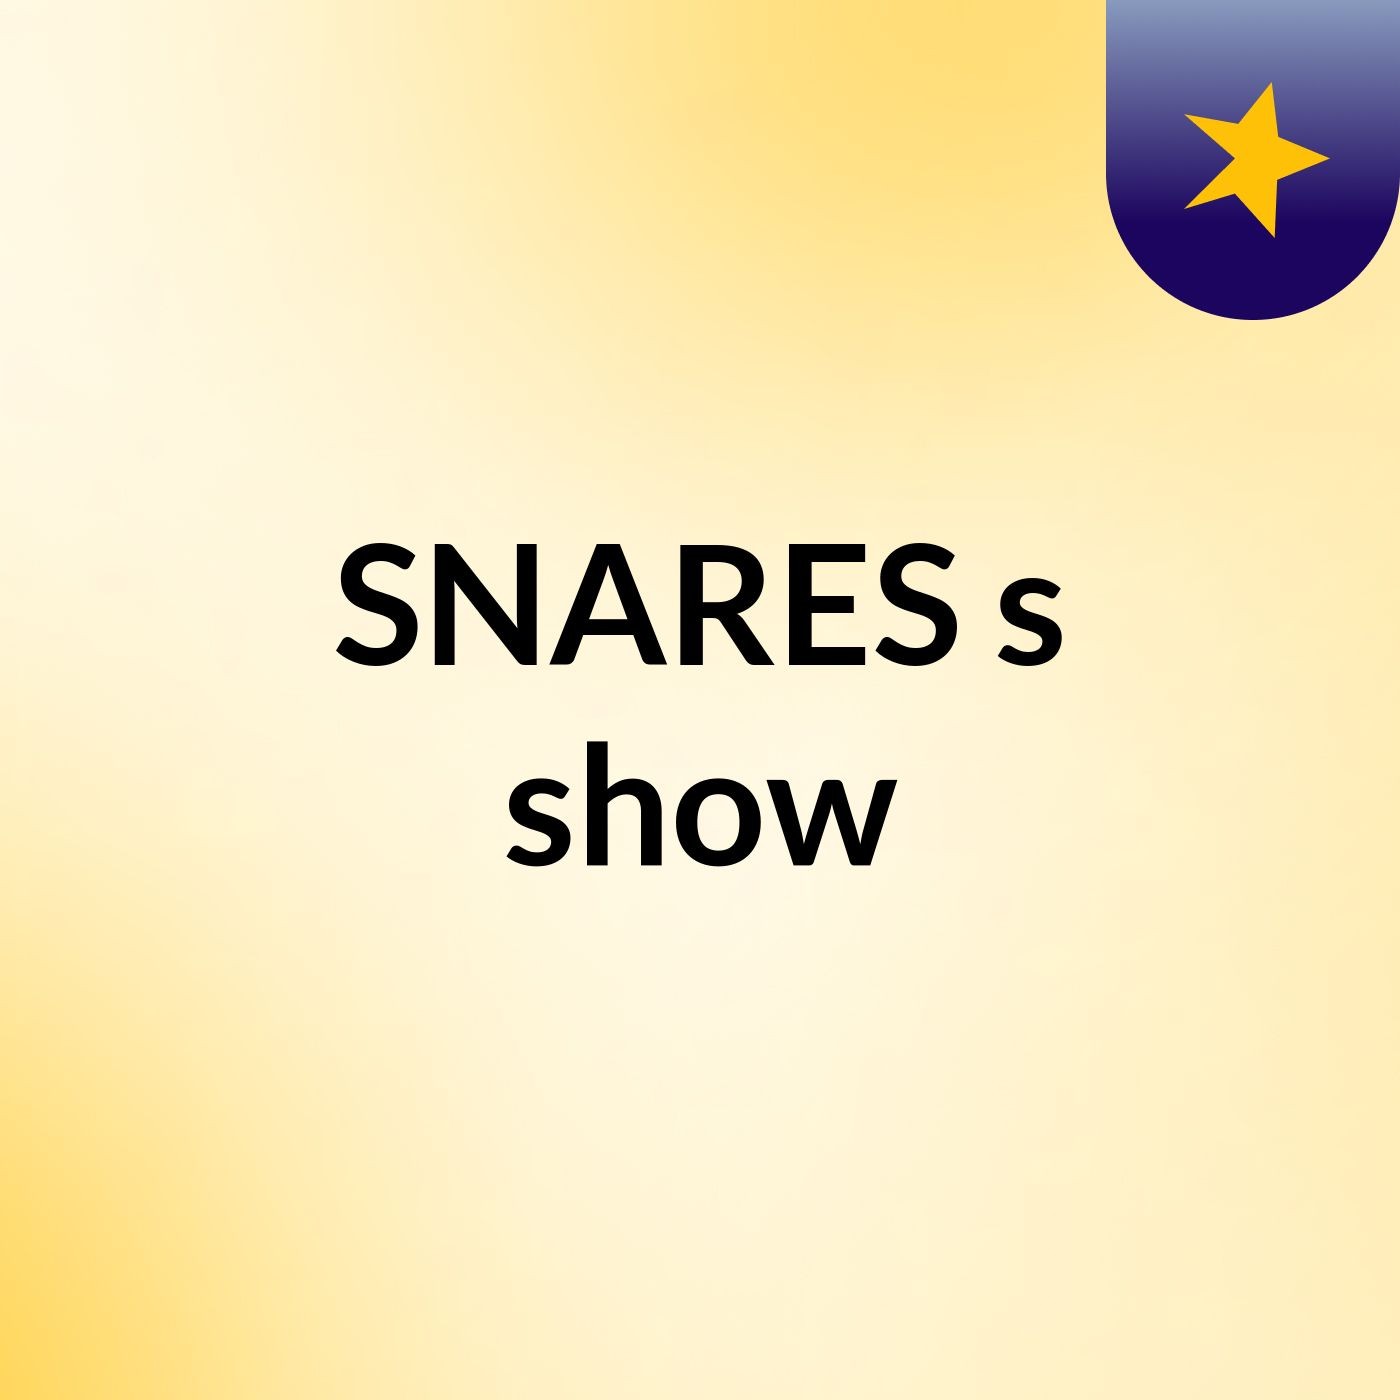 SNARES's show